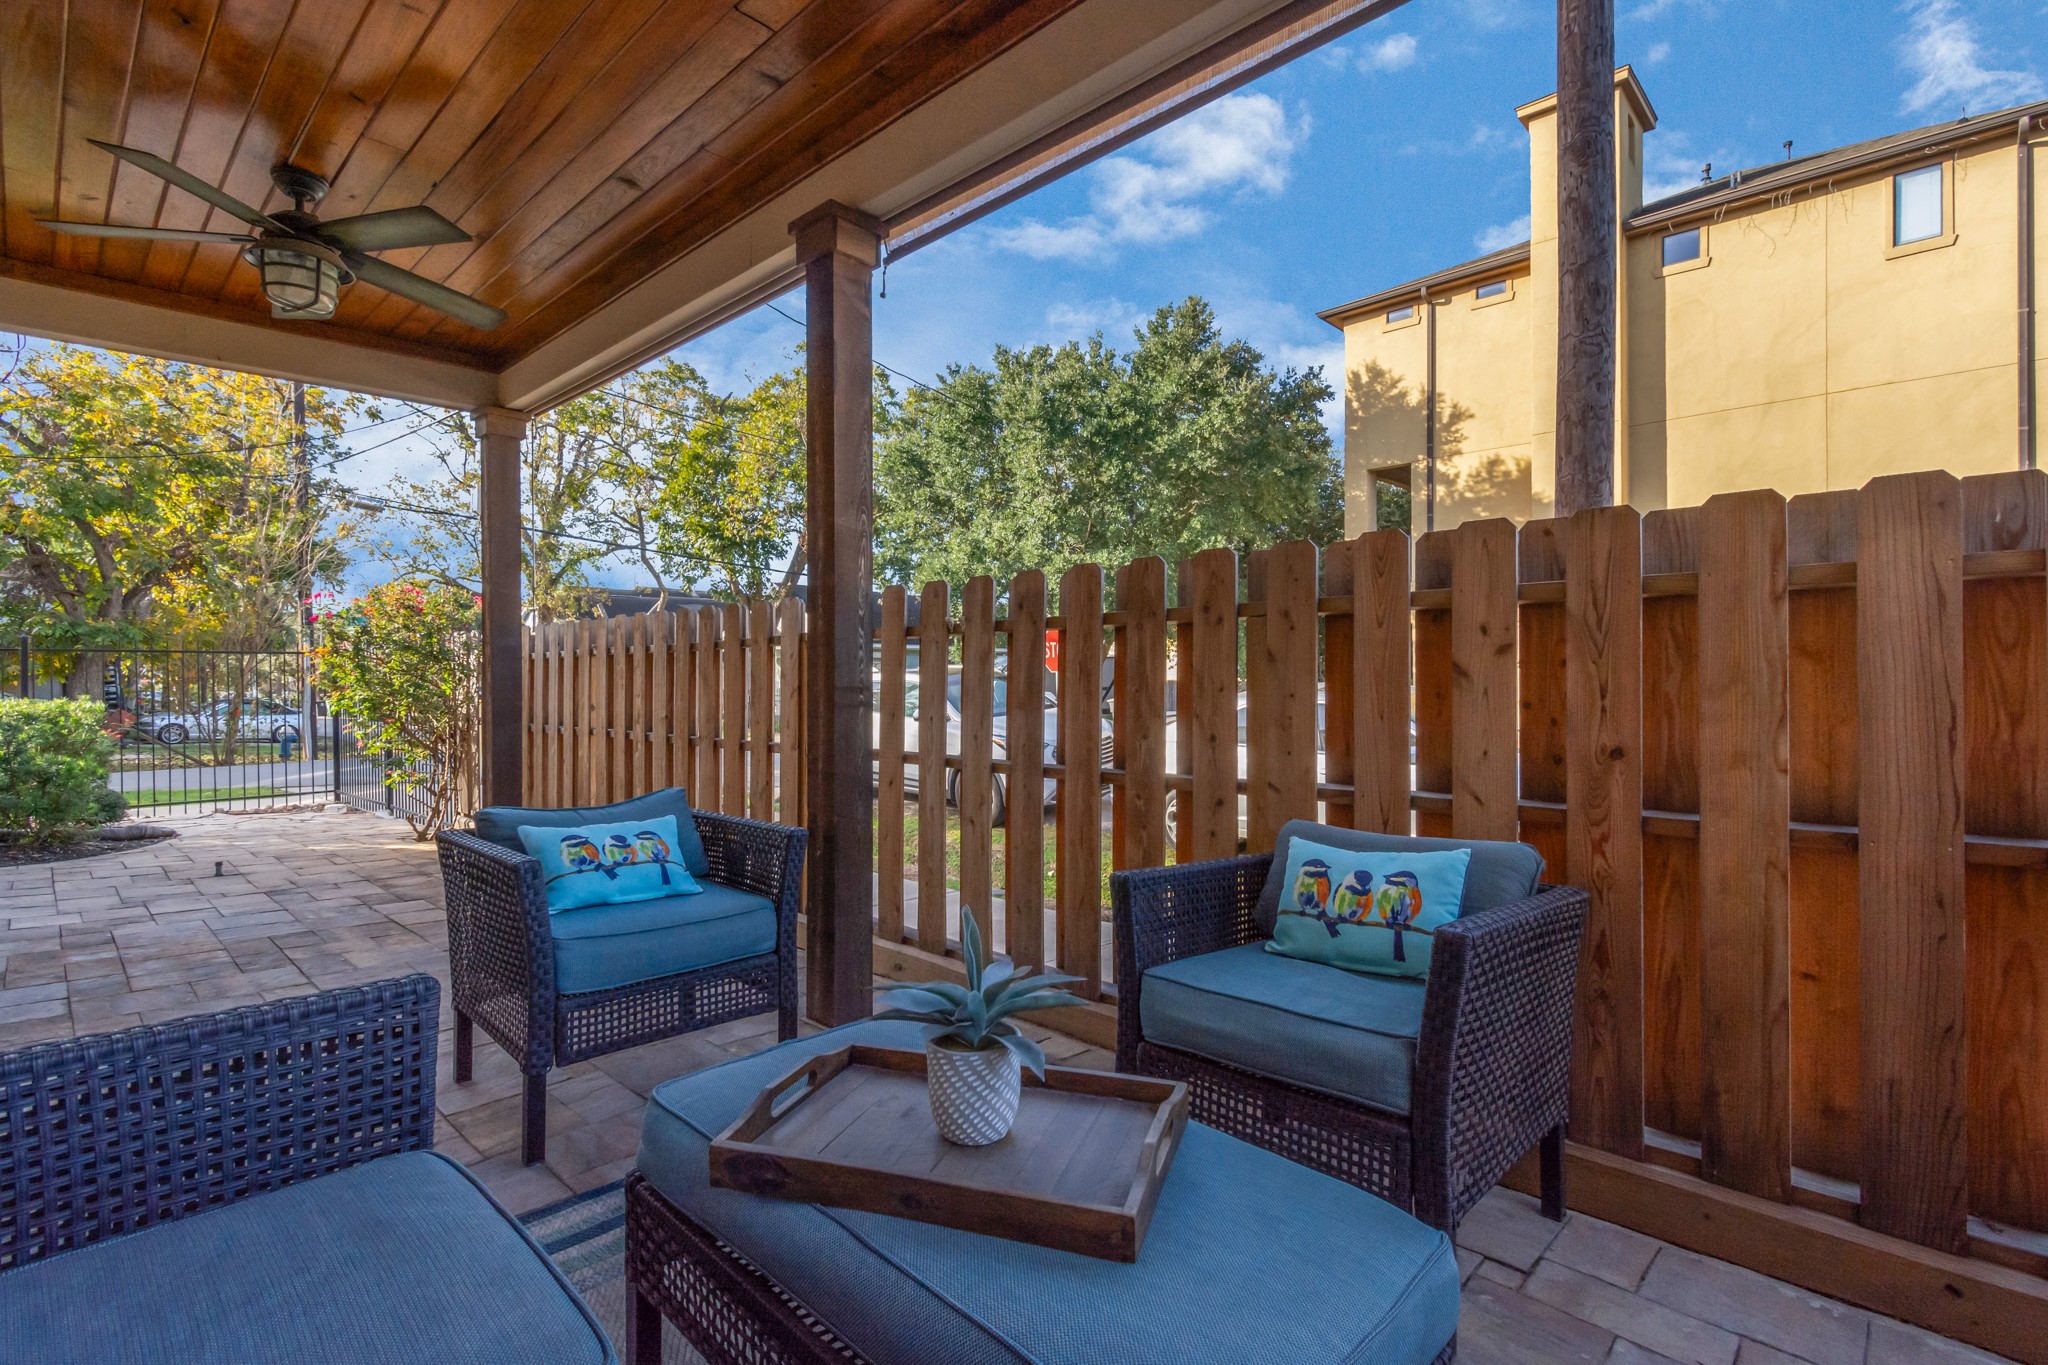 Perfect for outdoor gatherings, the well-designed custom-covered patio creates the perfect setting.